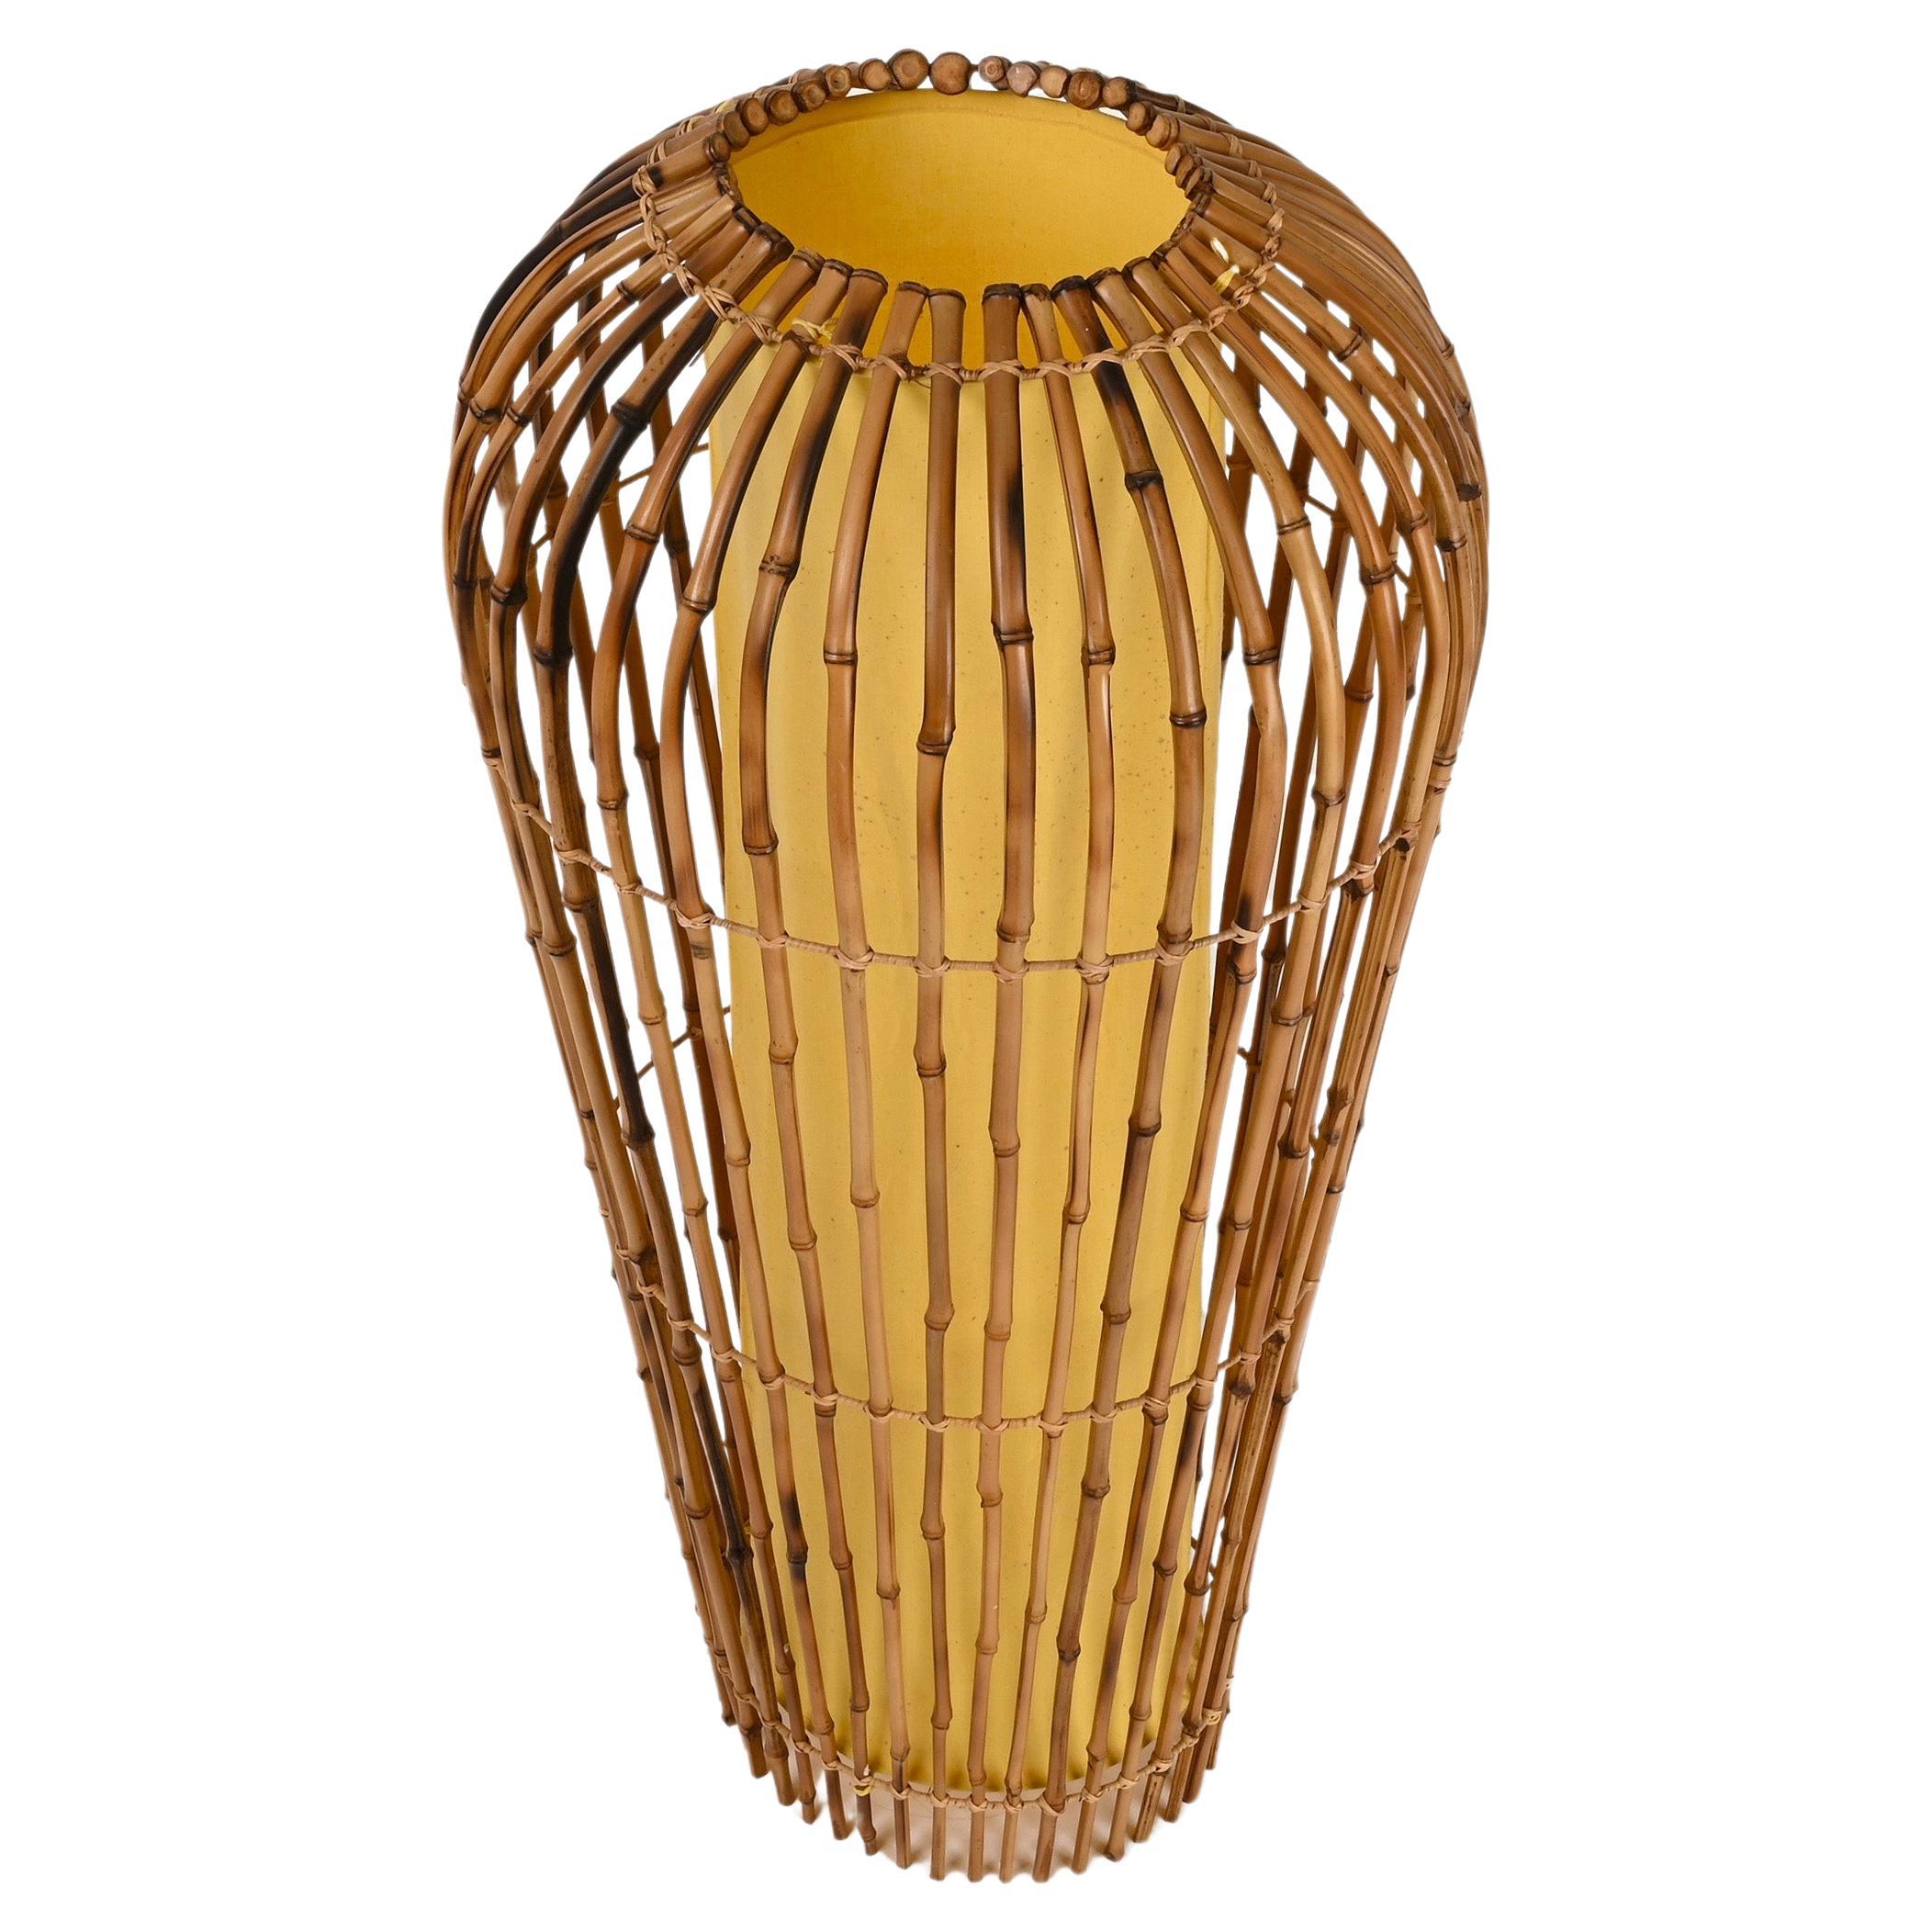 Midcentury Bamboo Cane and Rattan Italian Floor Lamp after Franco Albini, 1970s